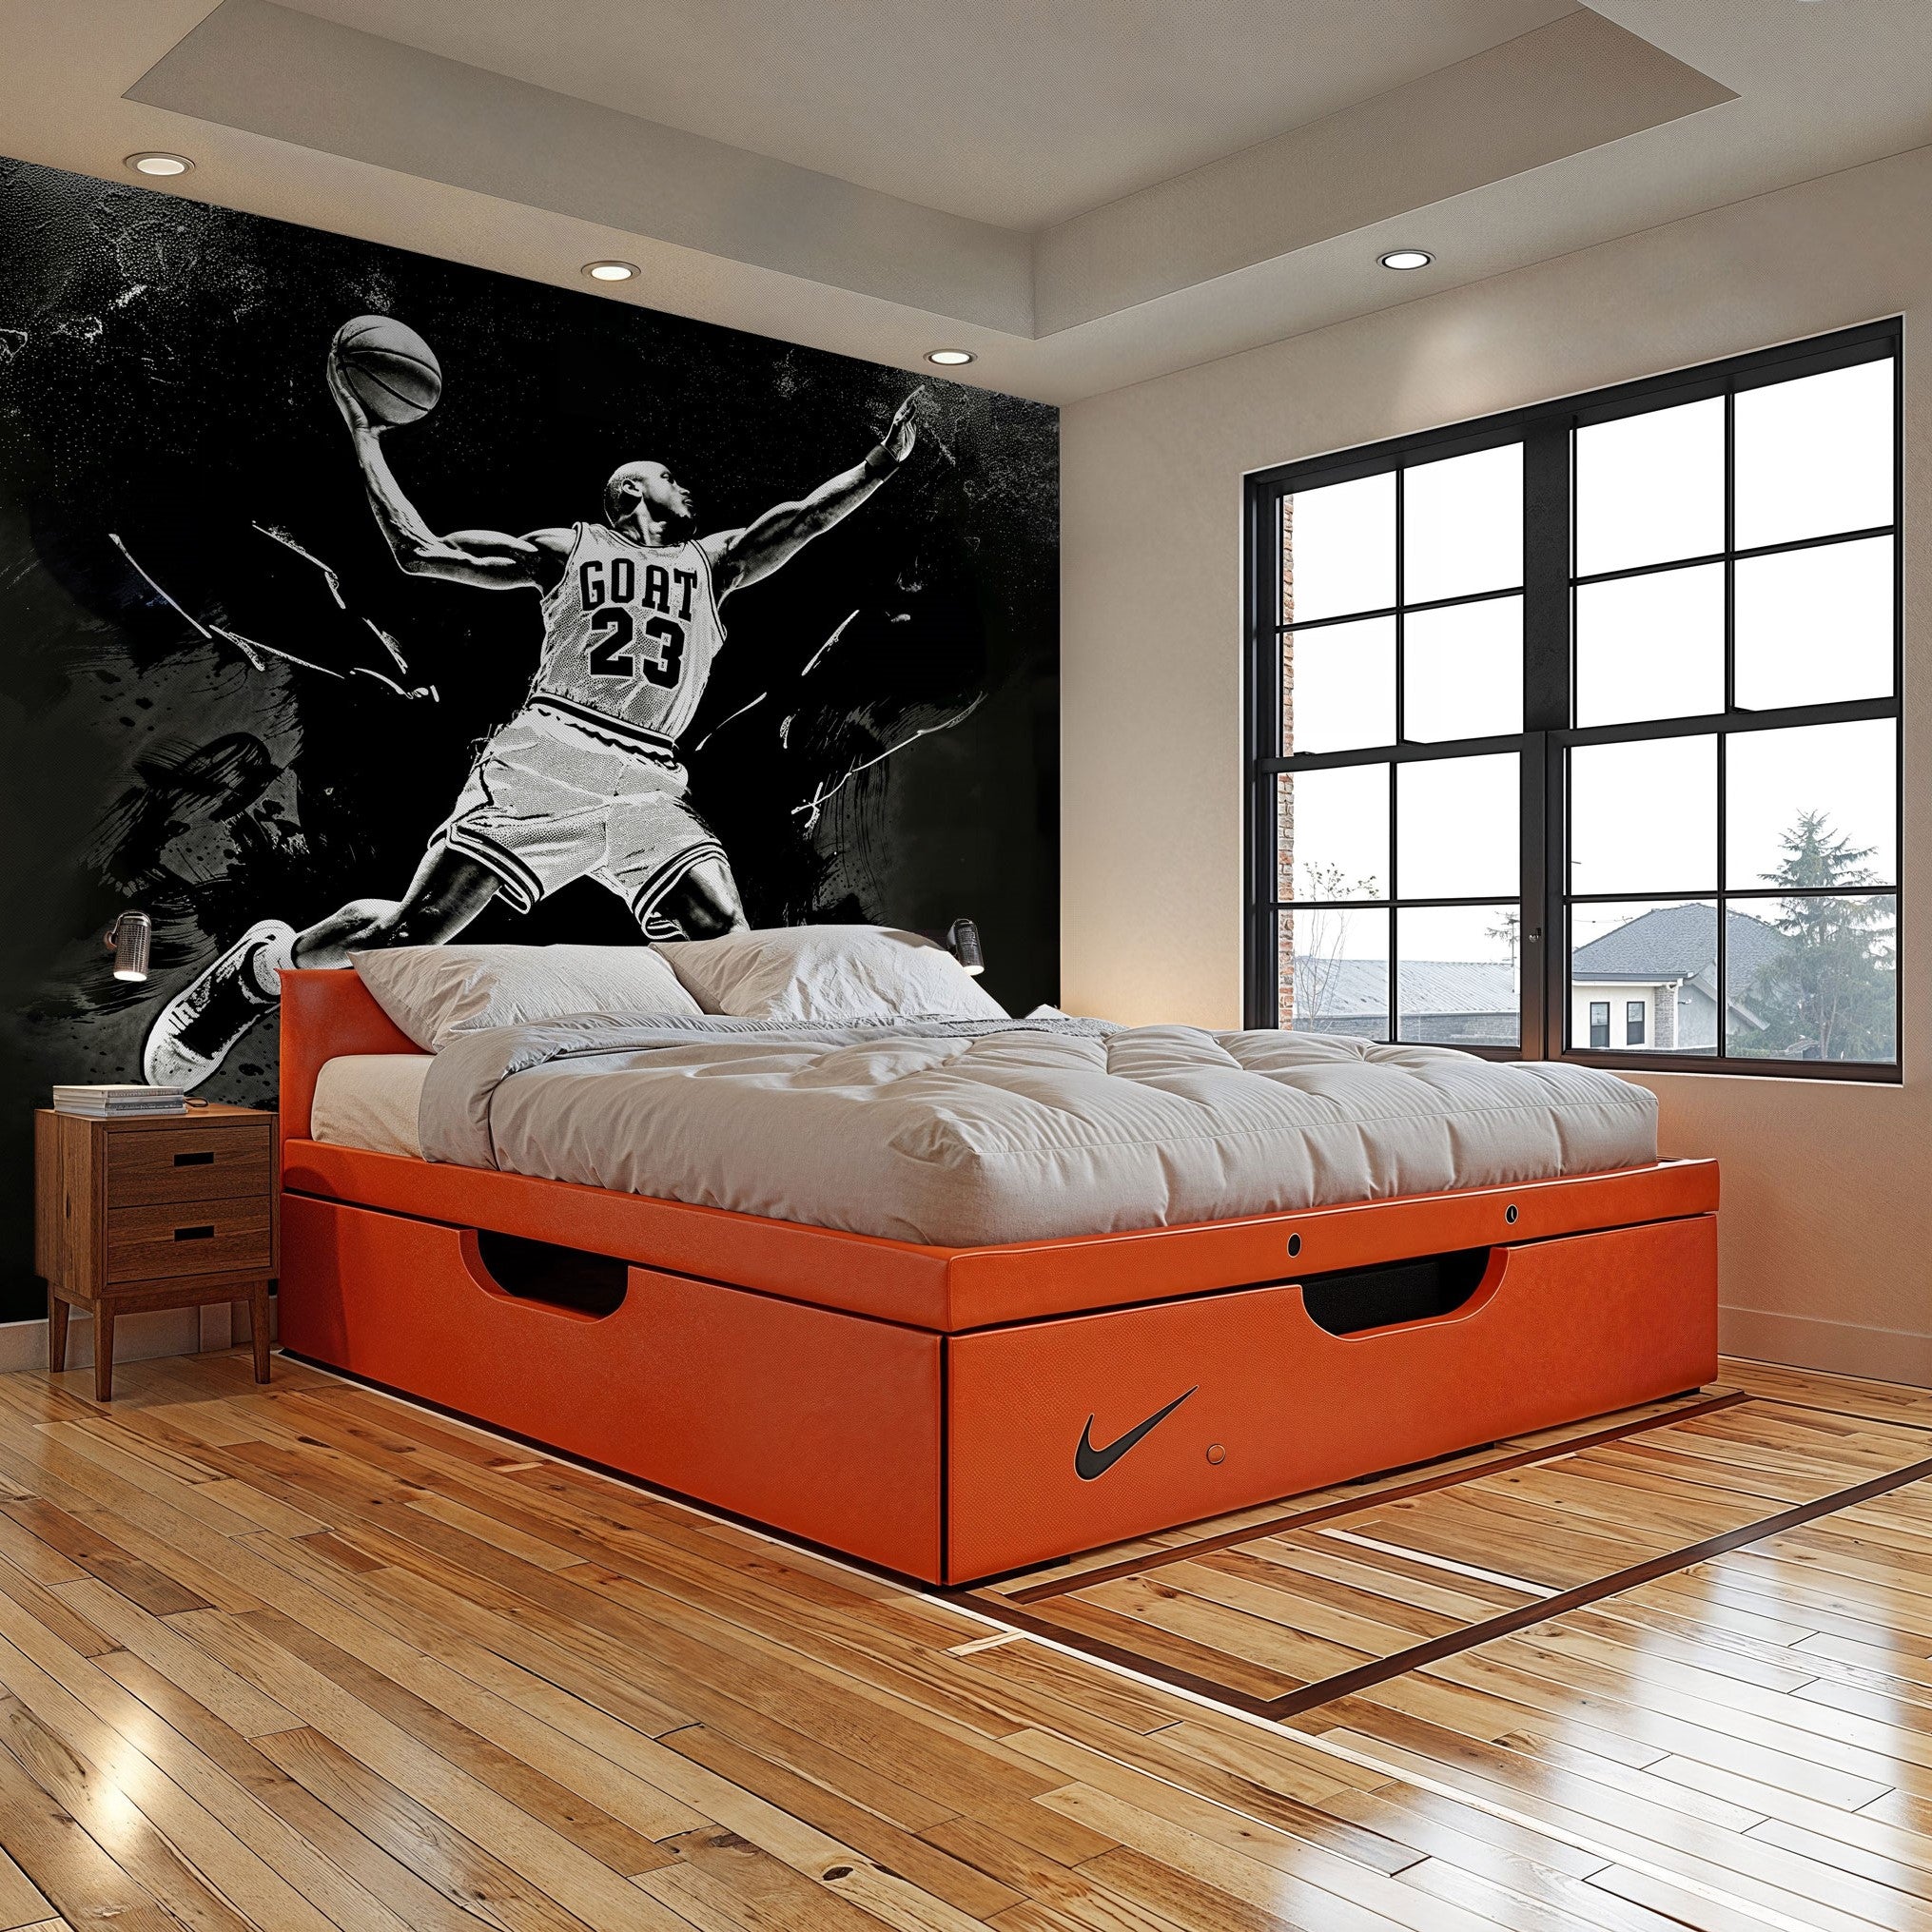 "Wall Blush's The GOAT Wallpaper featuring basketball imagery in a modern bedroom setting, accenting sports-themed decor."